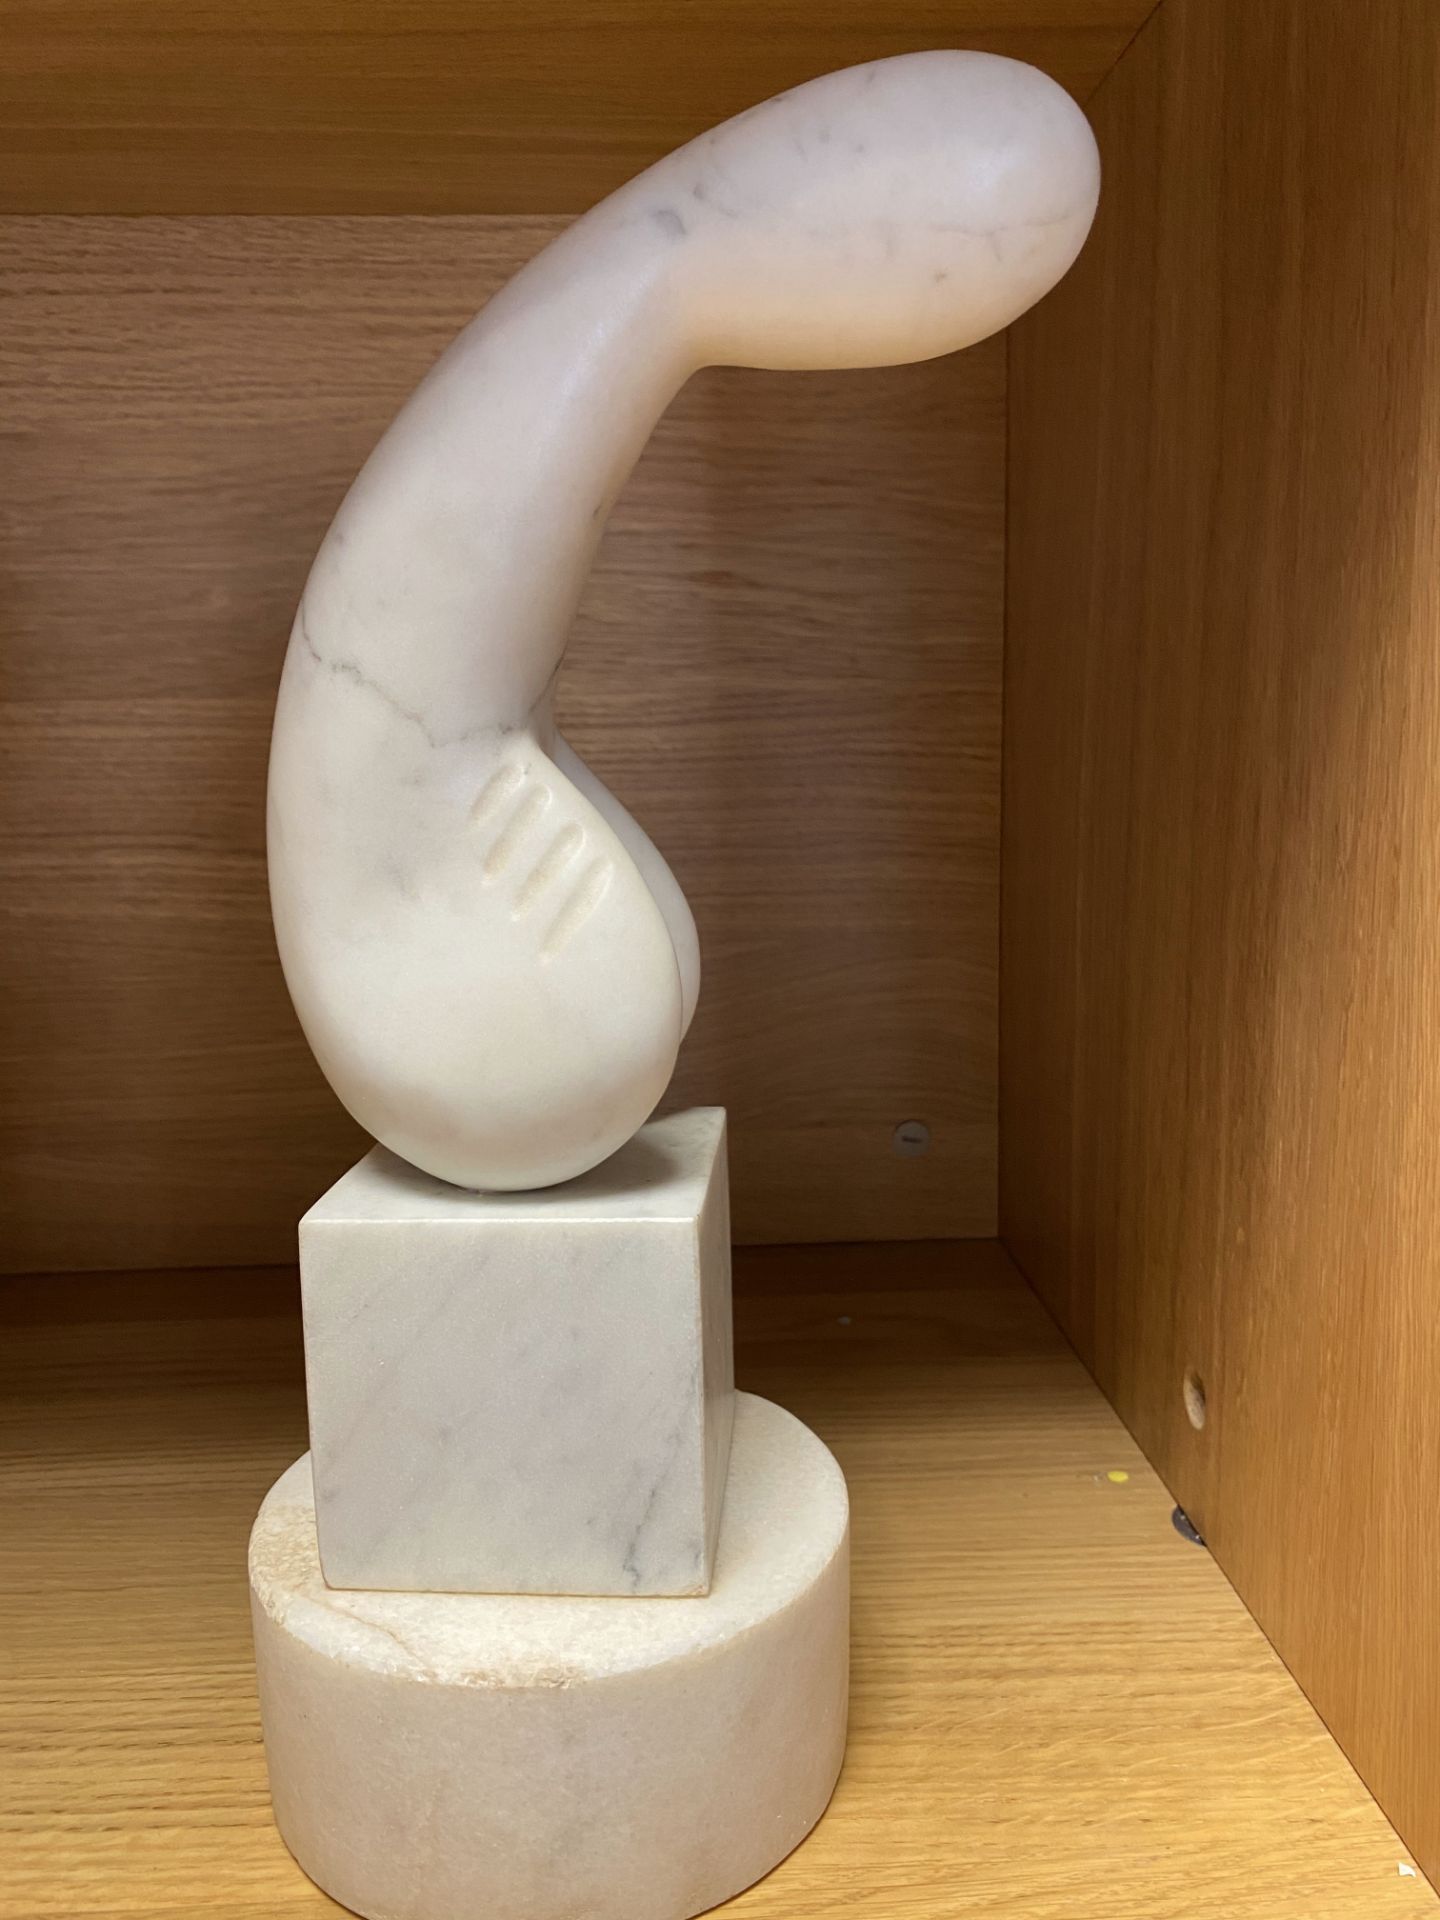 Constantin Brancusi (1876-1957) Marble Art Sculpture Signed and Dated 1943 - Image 2 of 9